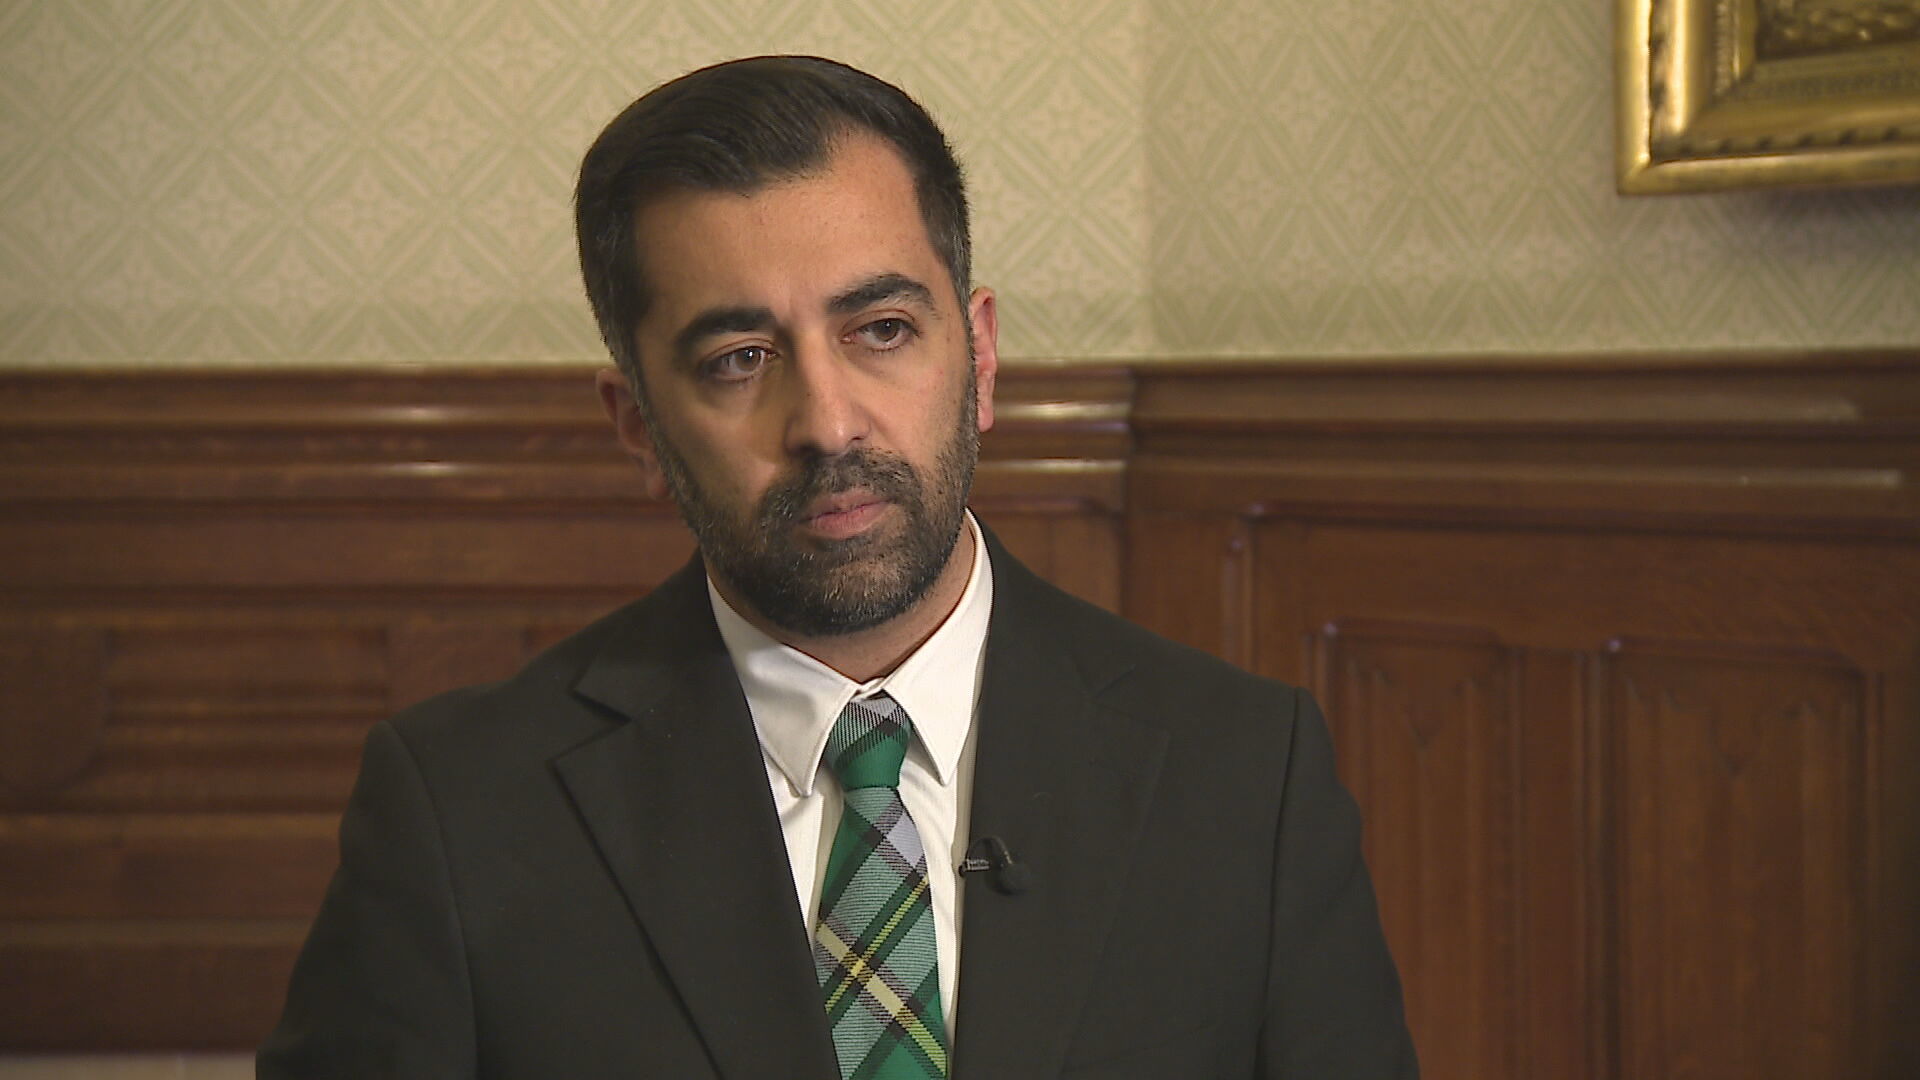 Humza Yousaf is among the pupils to have attended Hutchesons' Grammar School.